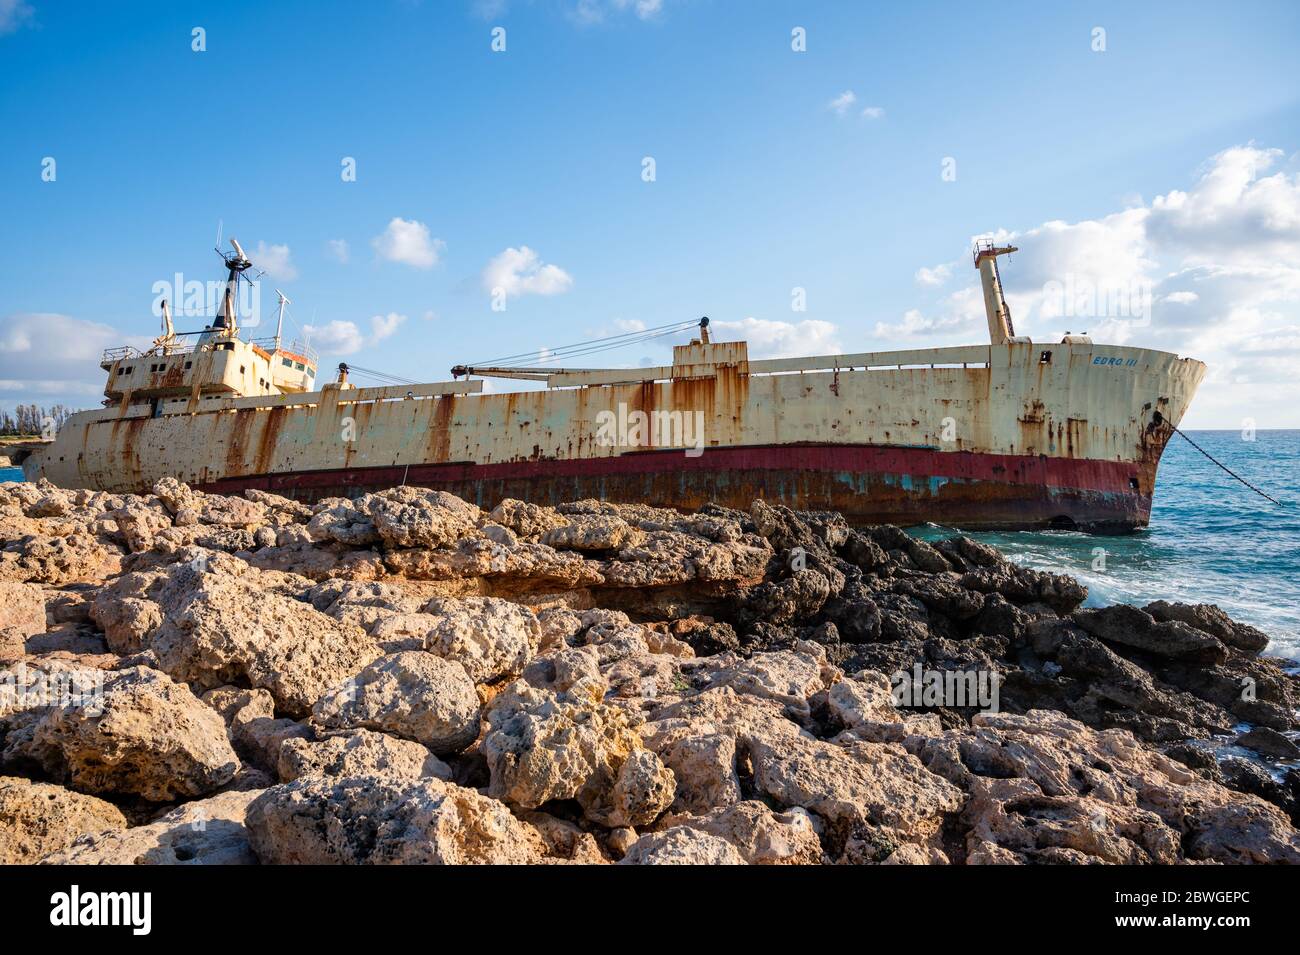 Shipwreck of the Edro III on the mediterranean coast of Cyprus close to Coral Bay and Paphos Stock Photo